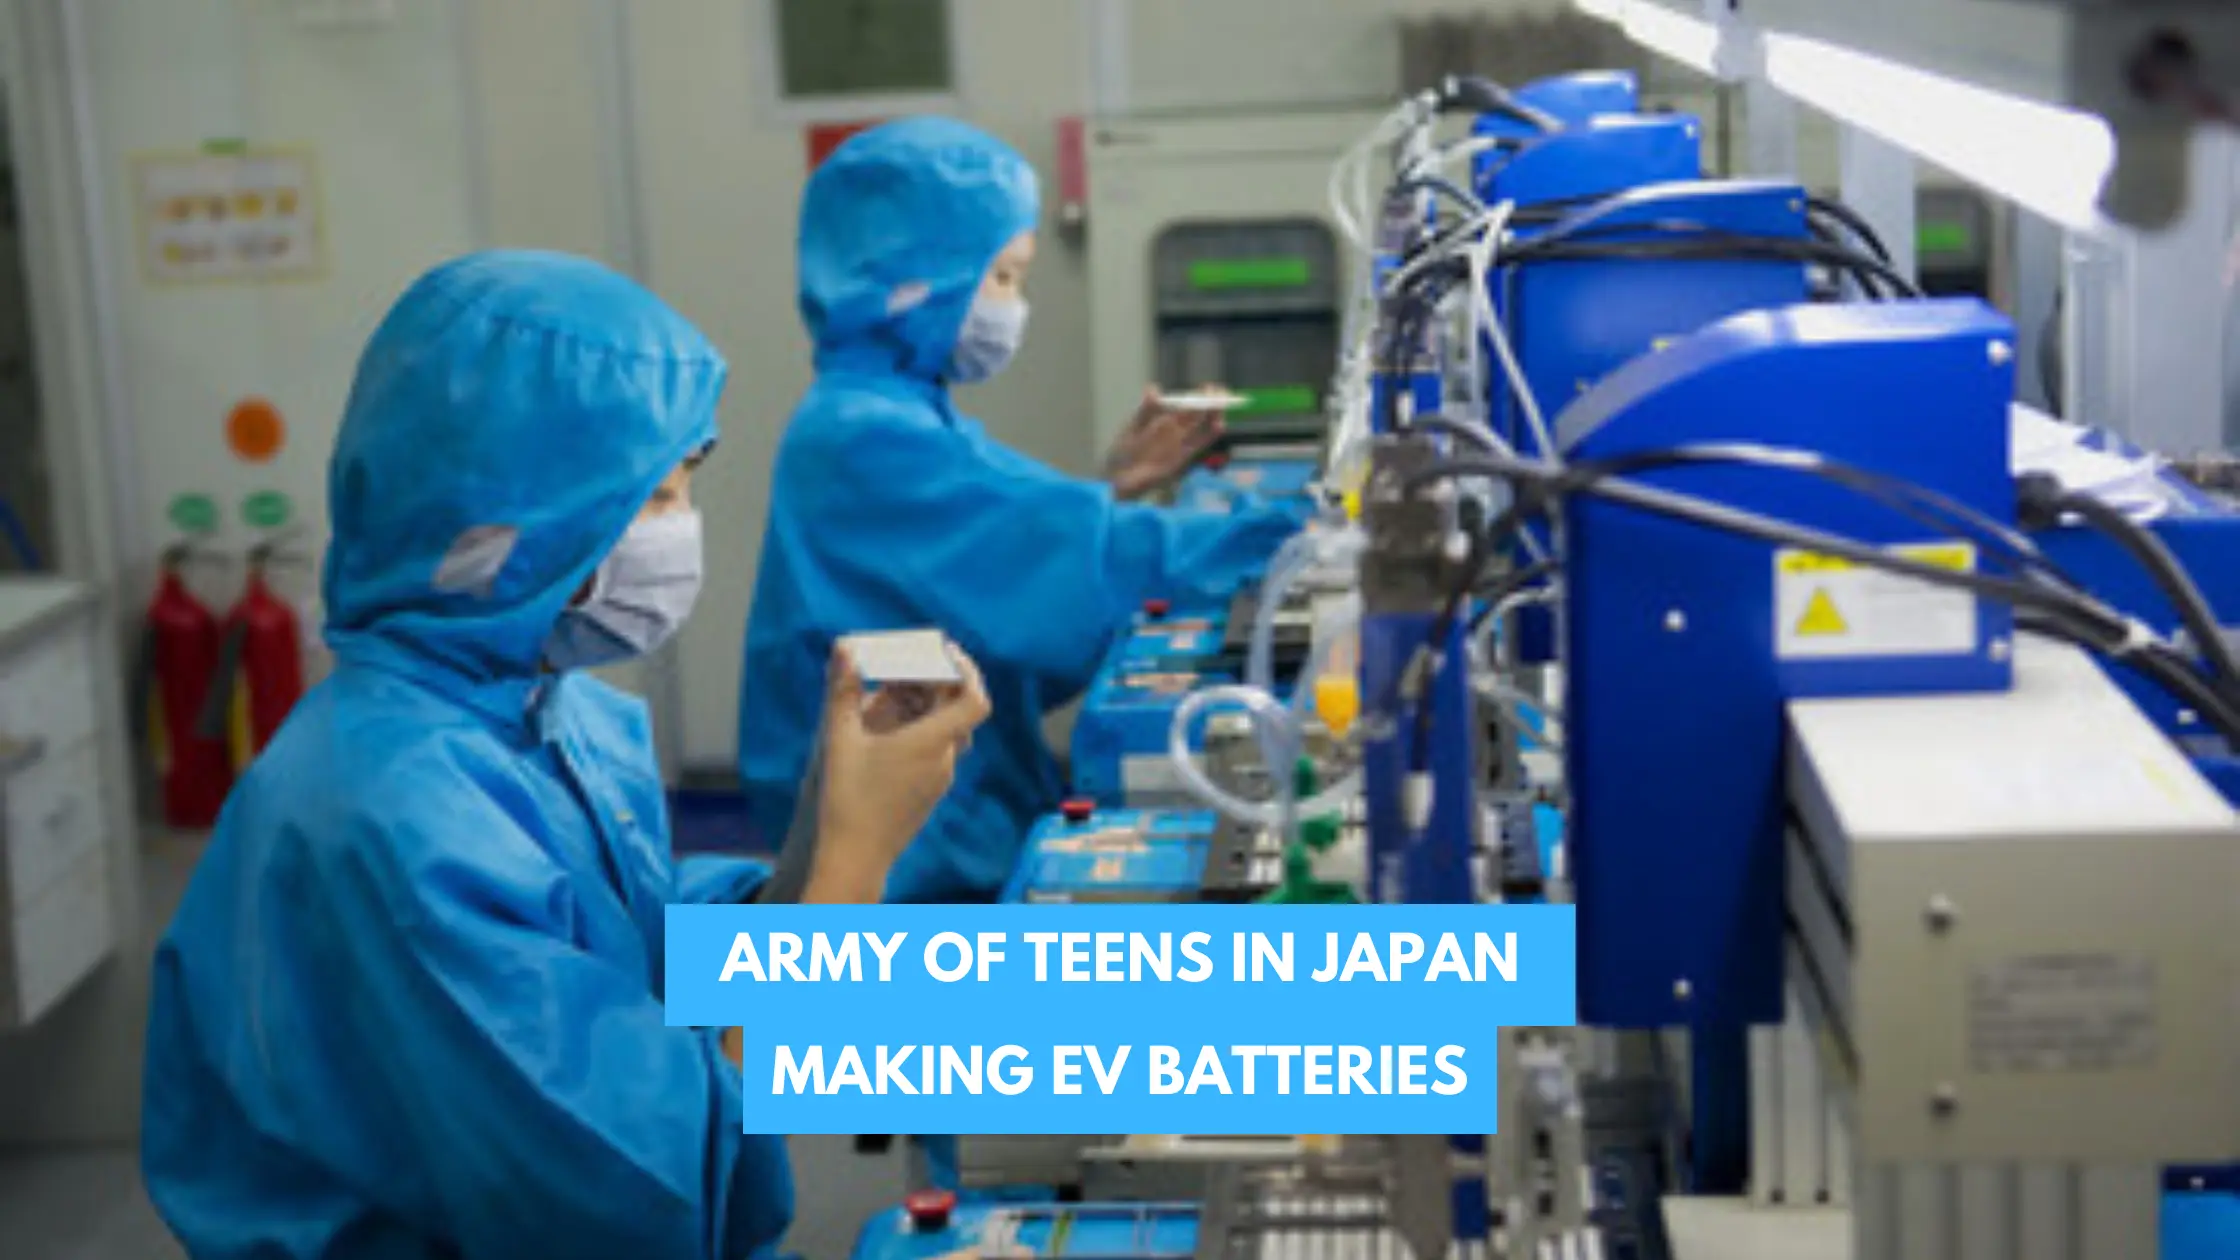 You are currently viewing Japan is Making an ‘Army’ of Teens for Making EV Batteries